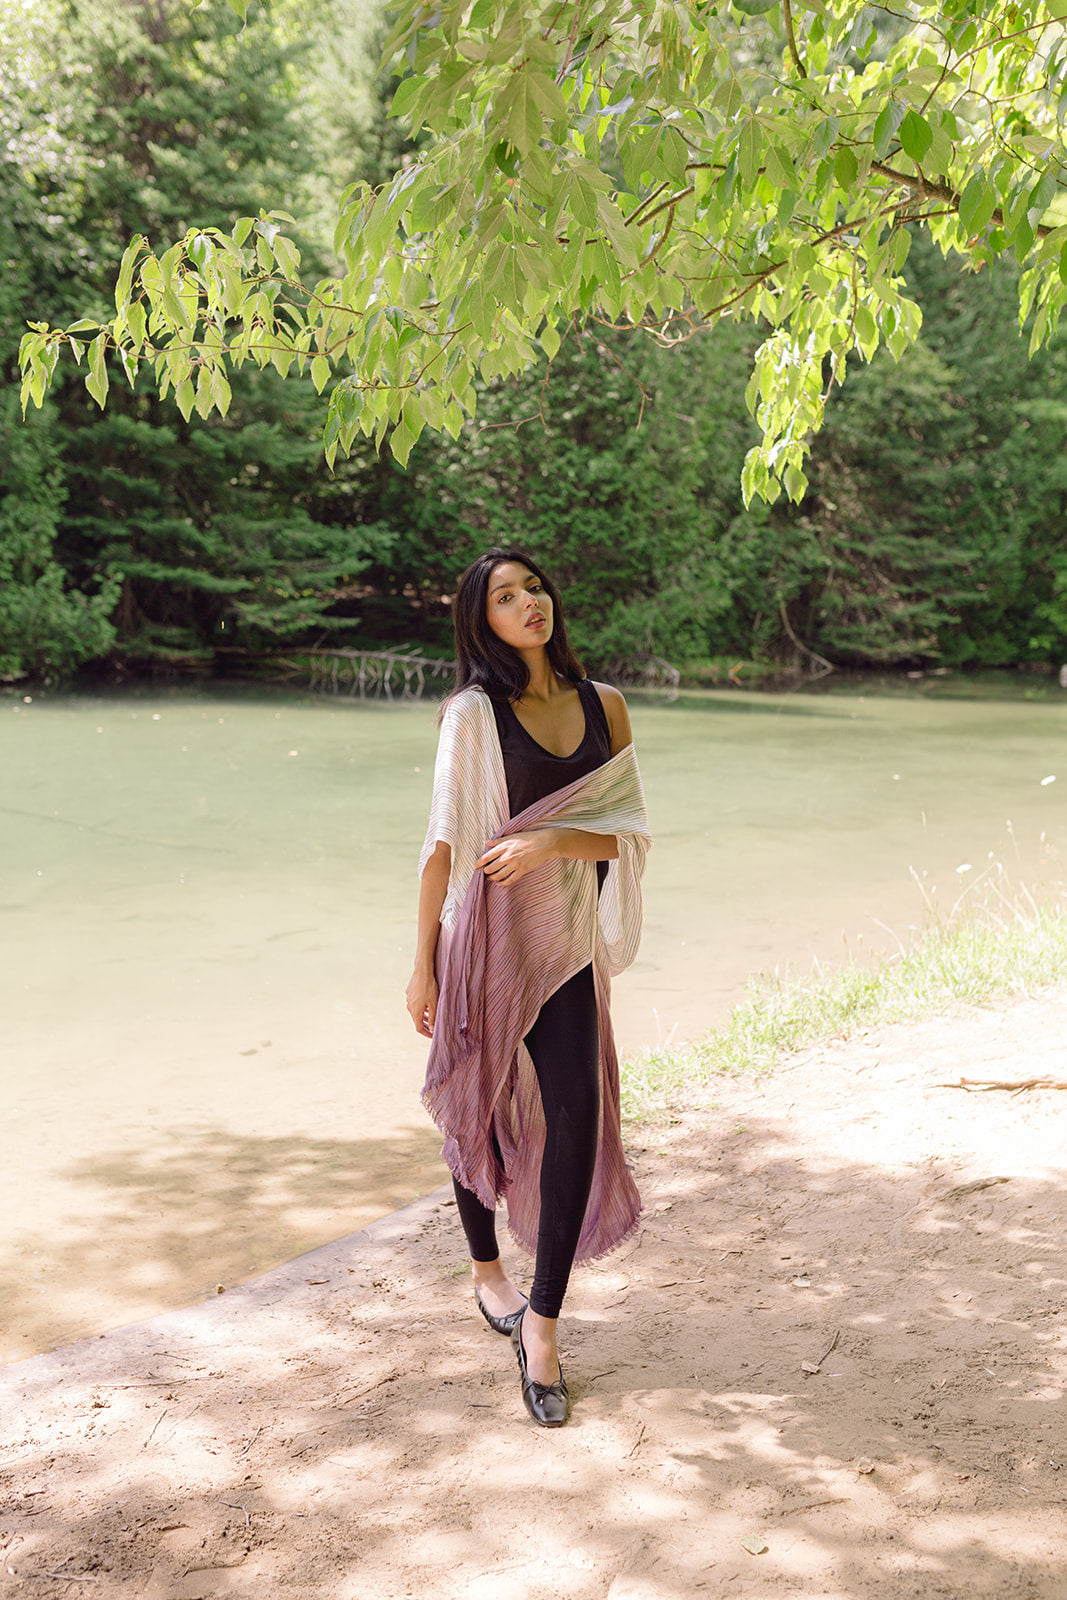 Women's beach coverup, light purple ombre kimono dress. Maternity clothing. Pictured with black top and leggings.